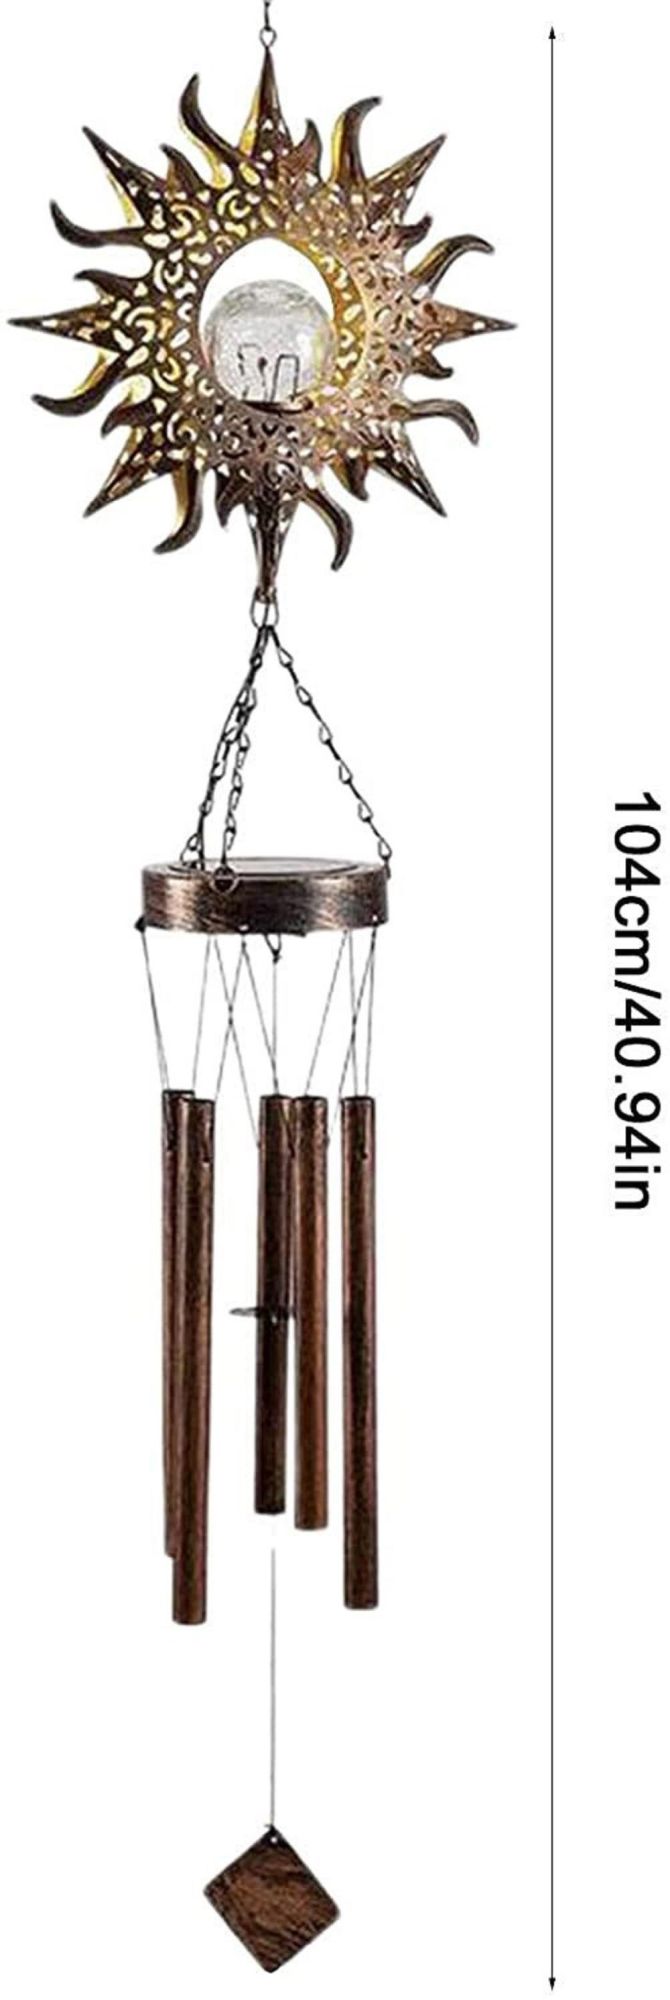 Solar Wind Chimes with Lights, Outdoor Wind Chimes for Patio Decoration, Large Retro Metal Chimes with Broken Glass Balls, Stars, Moon Wyz18491